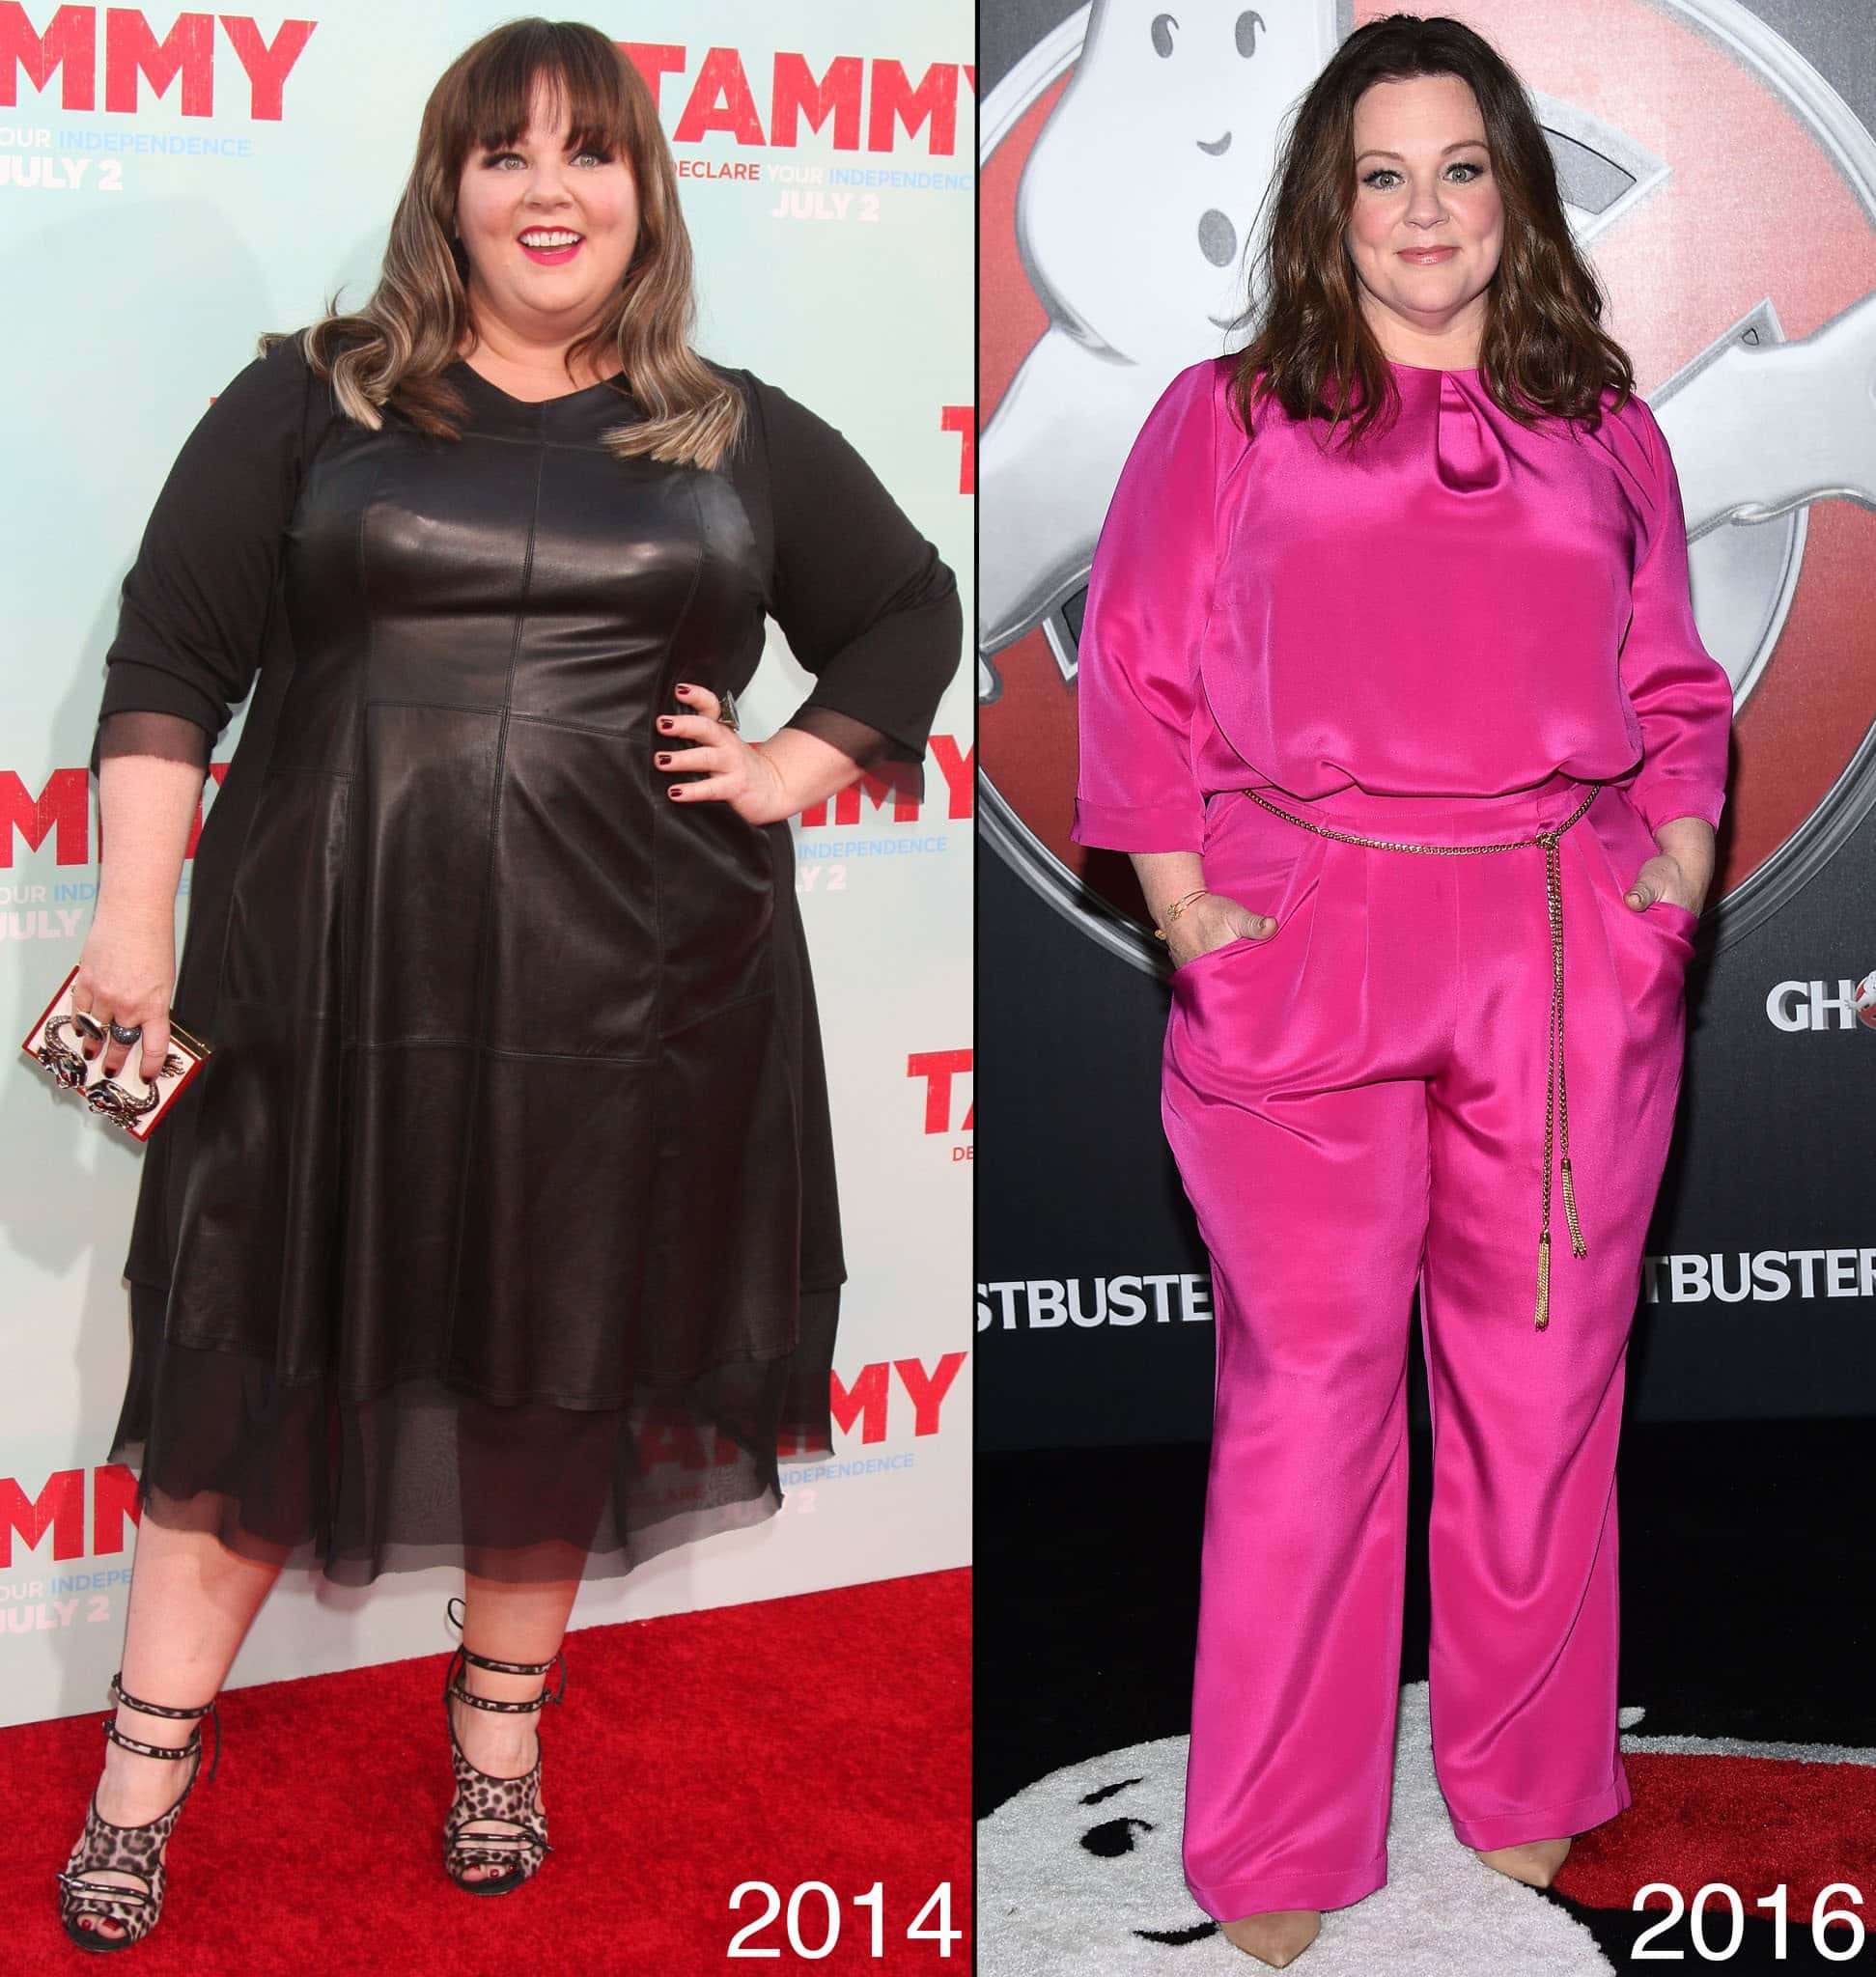 Letting go of worries about losing weight helped Melissa McCarthy actually lose weight